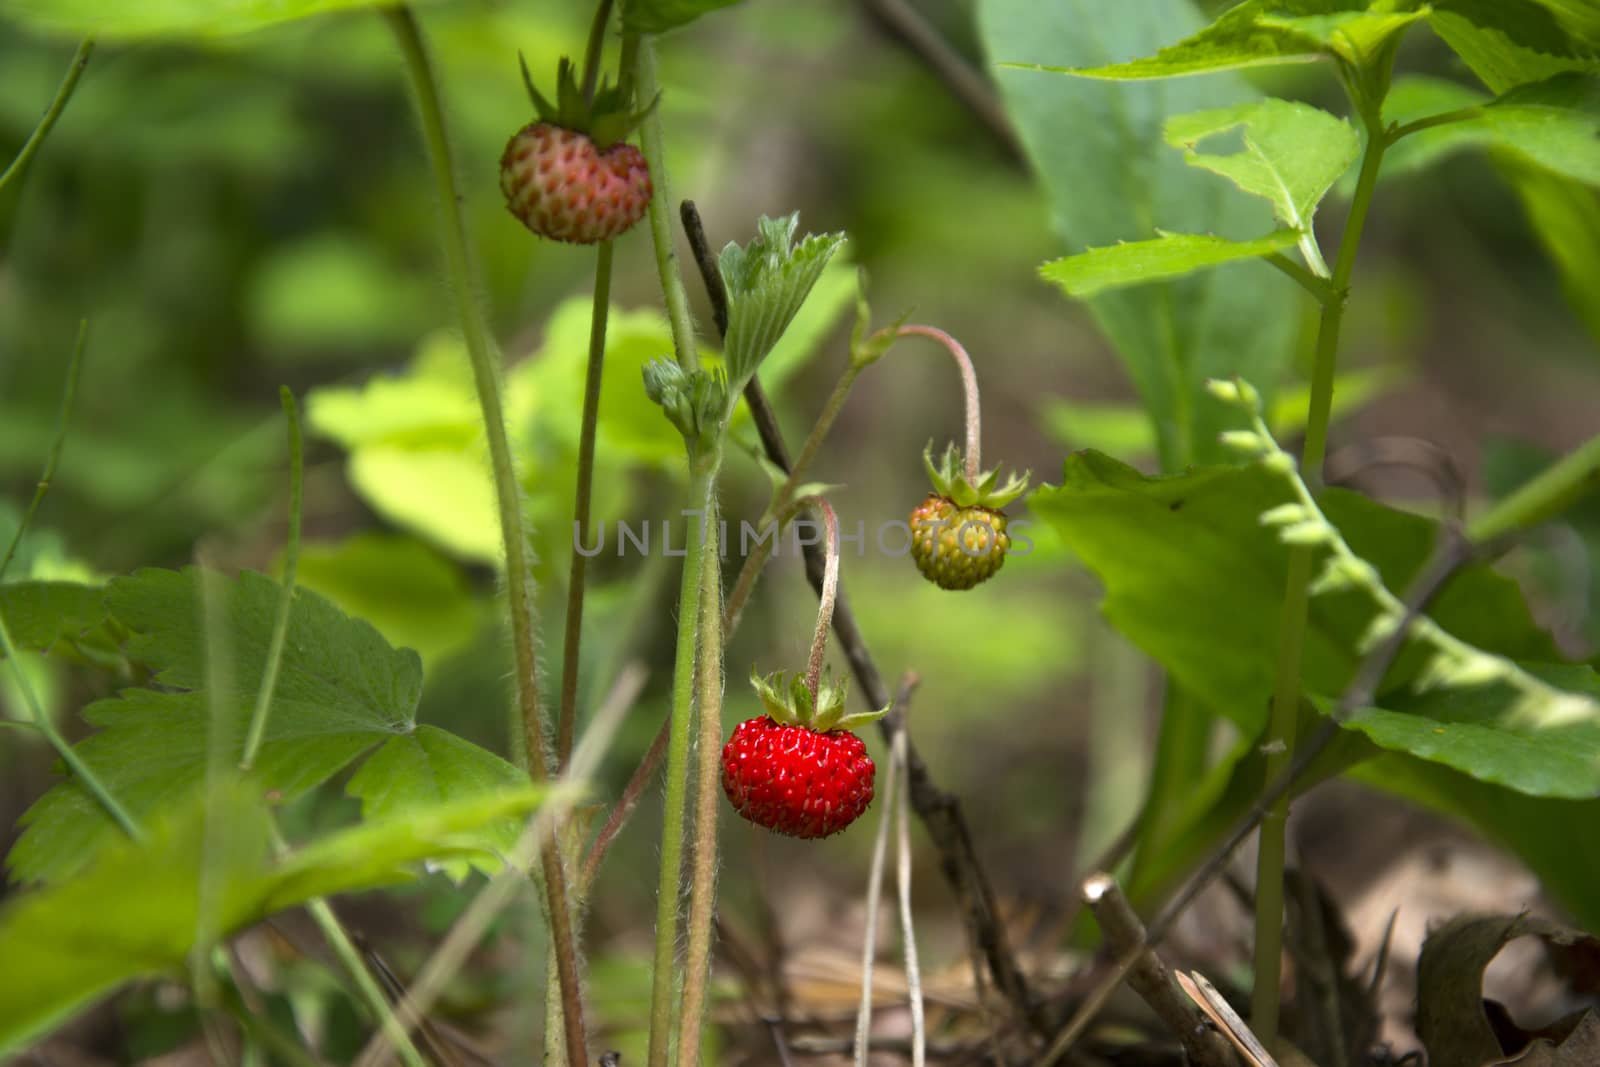 Strawberries on a stalk of green leaves